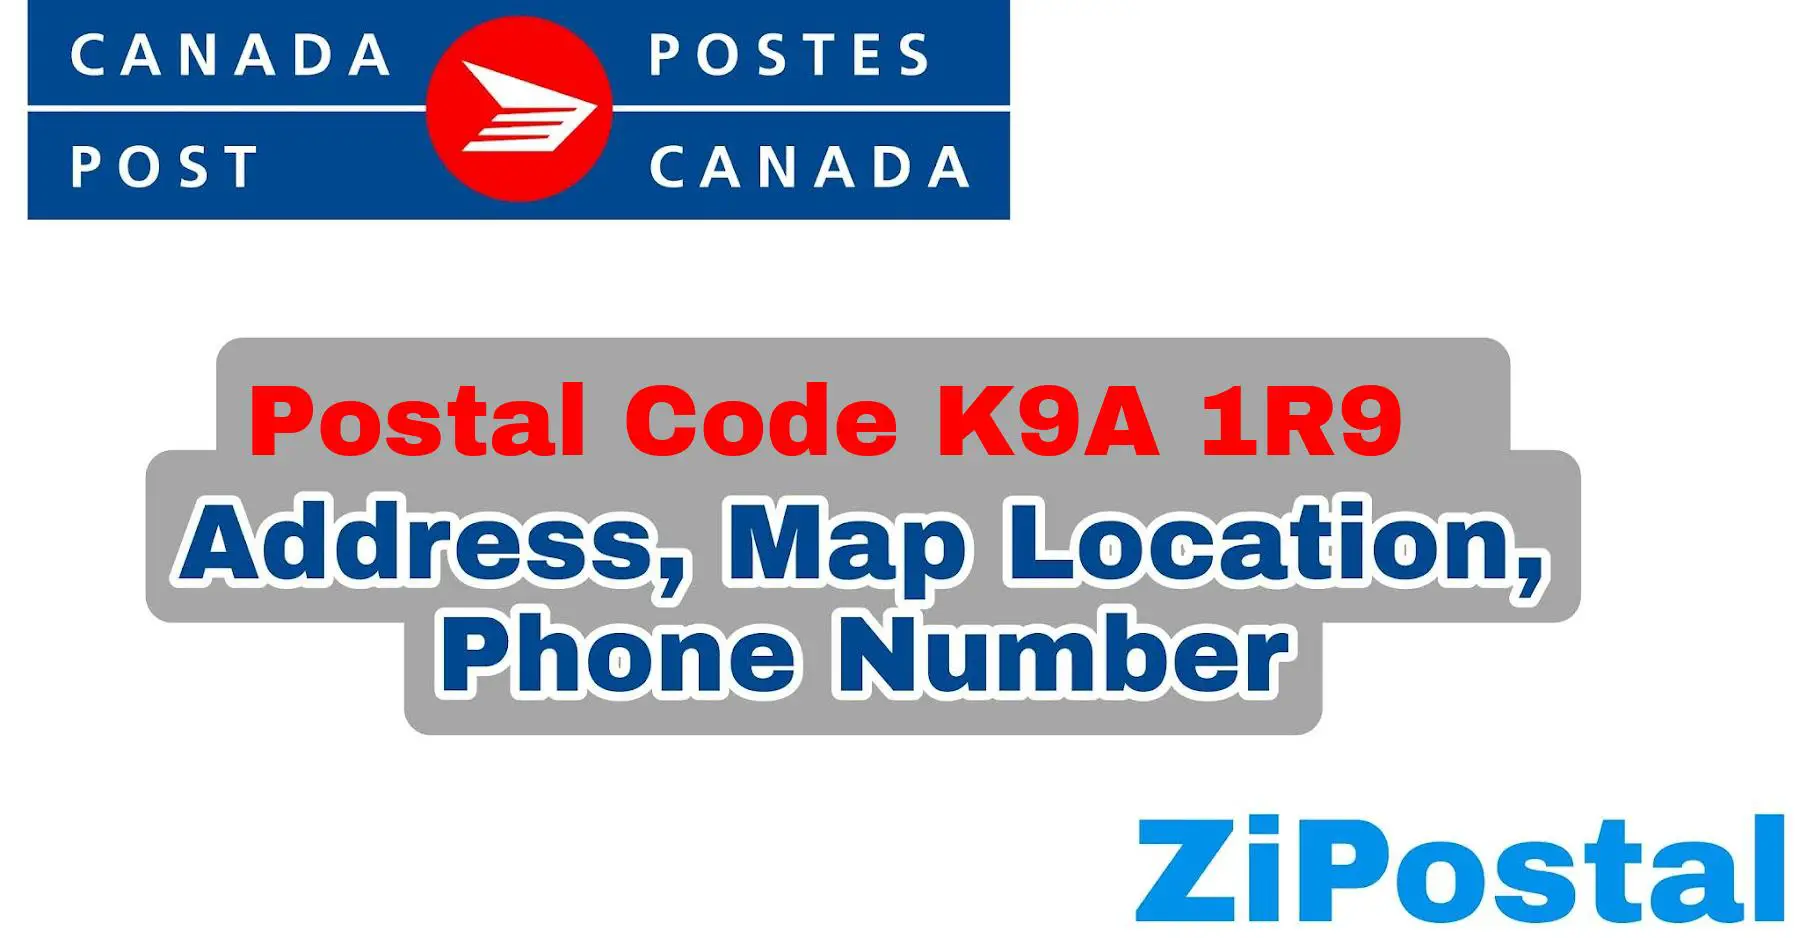 Postal Code K9A 1R9 Address Map Location and Phone Number